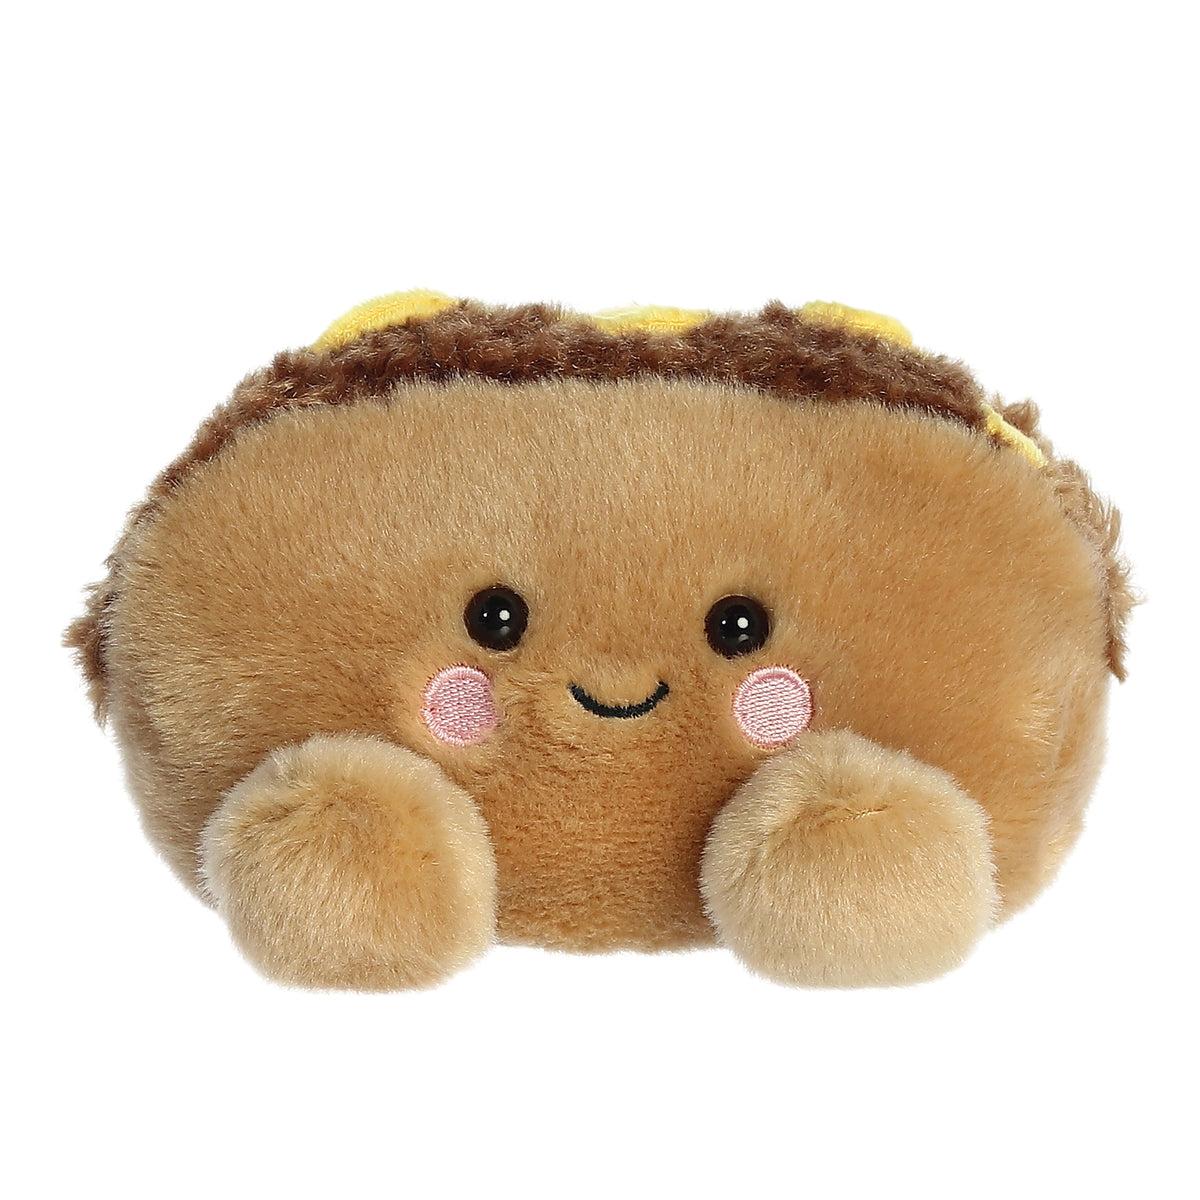 Mike Philly Cheesesteak plush from Palm Pals, with a warm bun and charming smile, symbolizes comfort and adventure